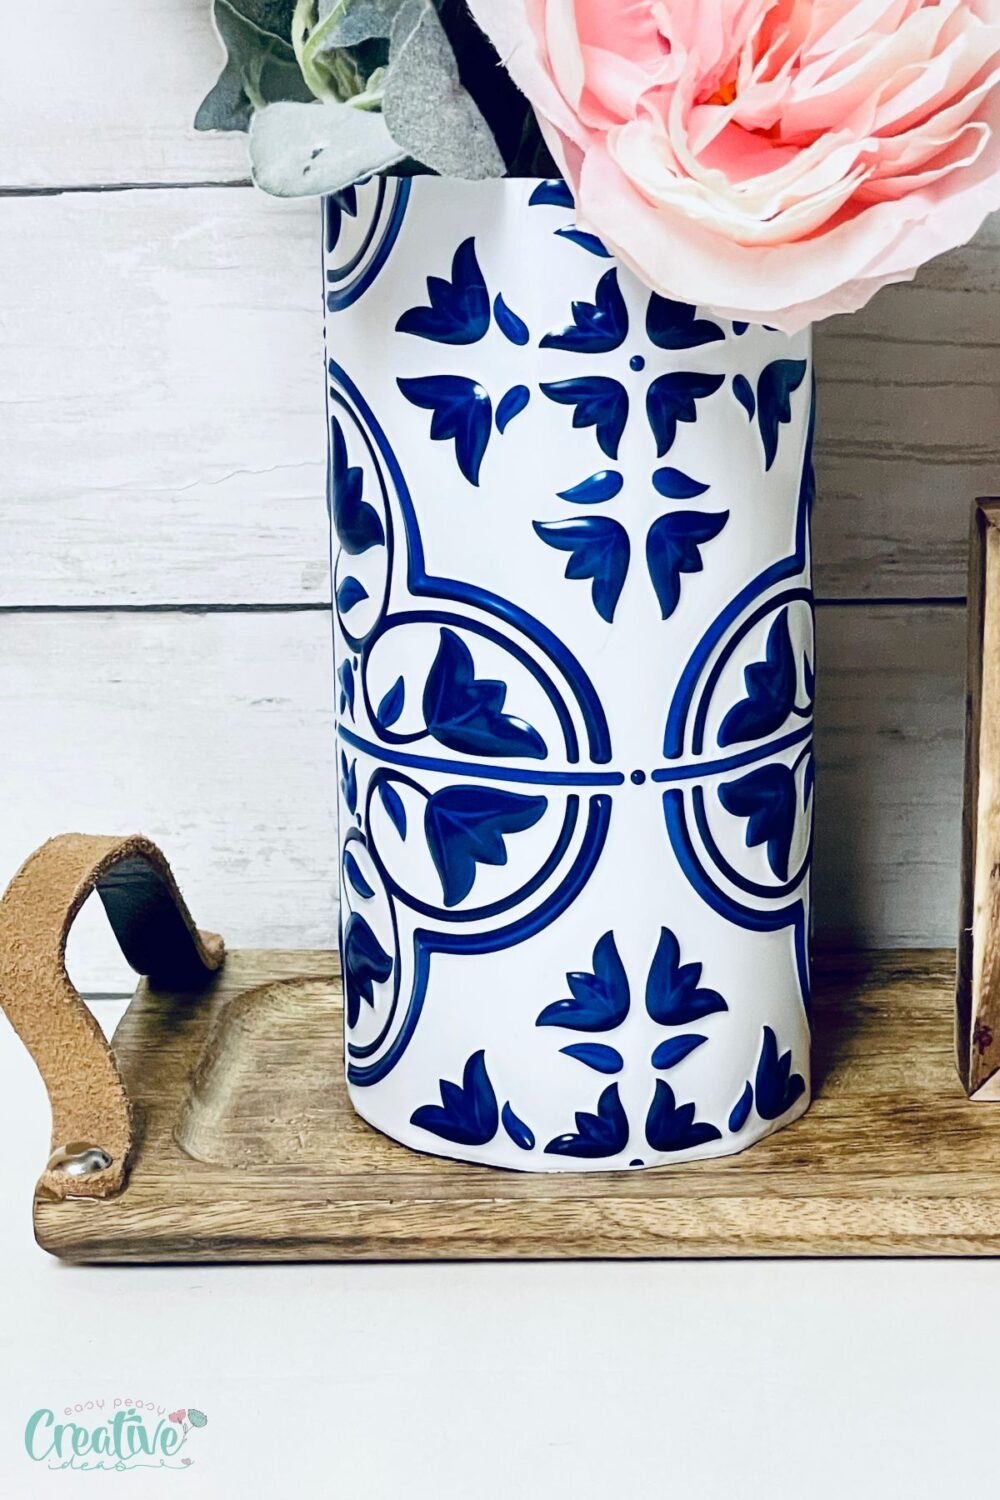 Not only is this DIY tile vase a creative project that allows you to personalize your living space, but it also makes for a great conversation starter and a unique handmade gift.